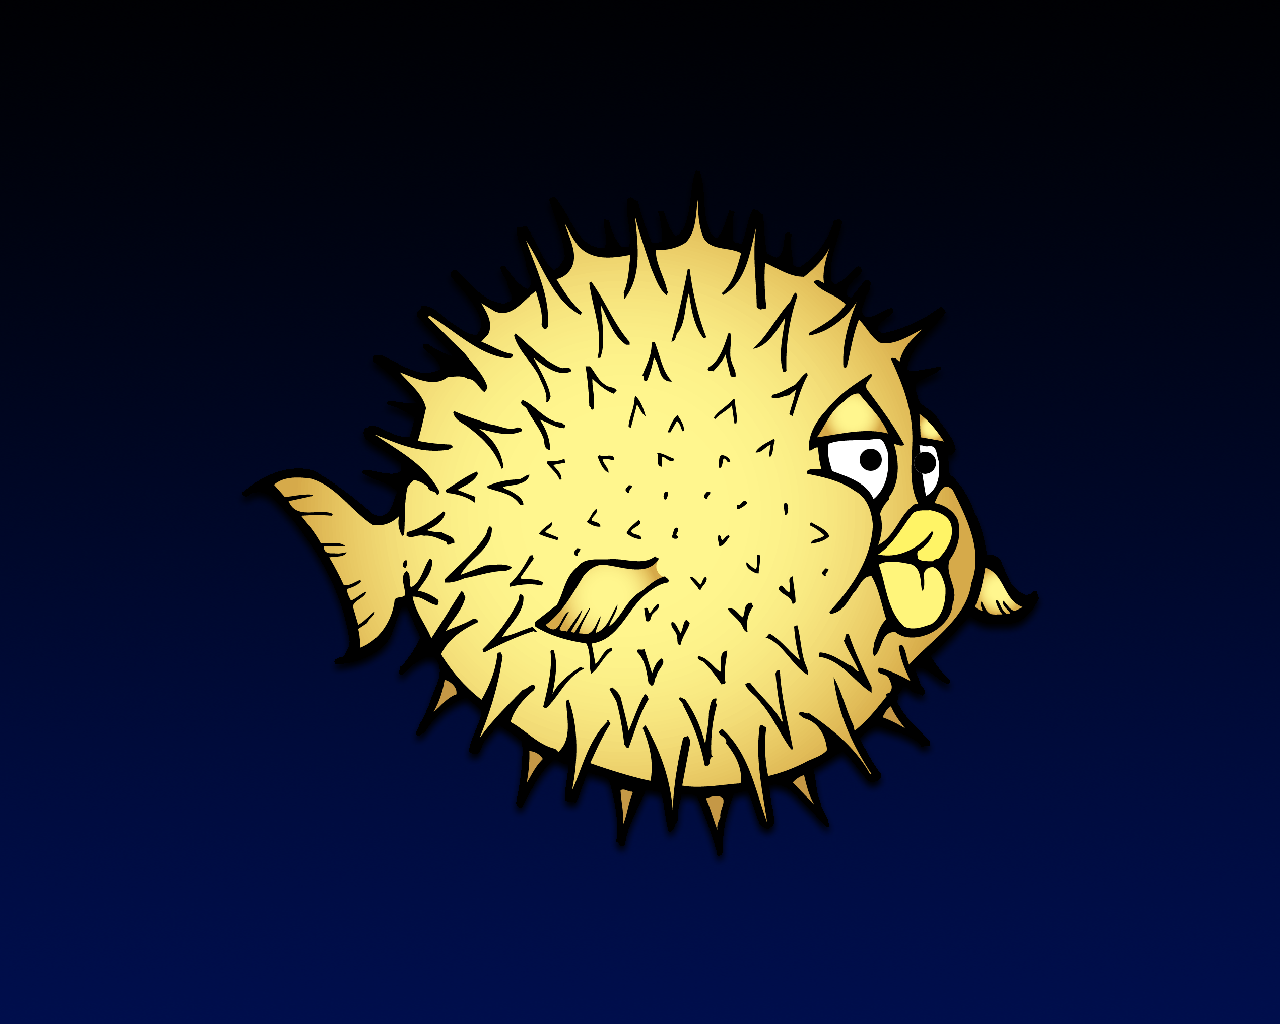 File:Openbsd yellow.png